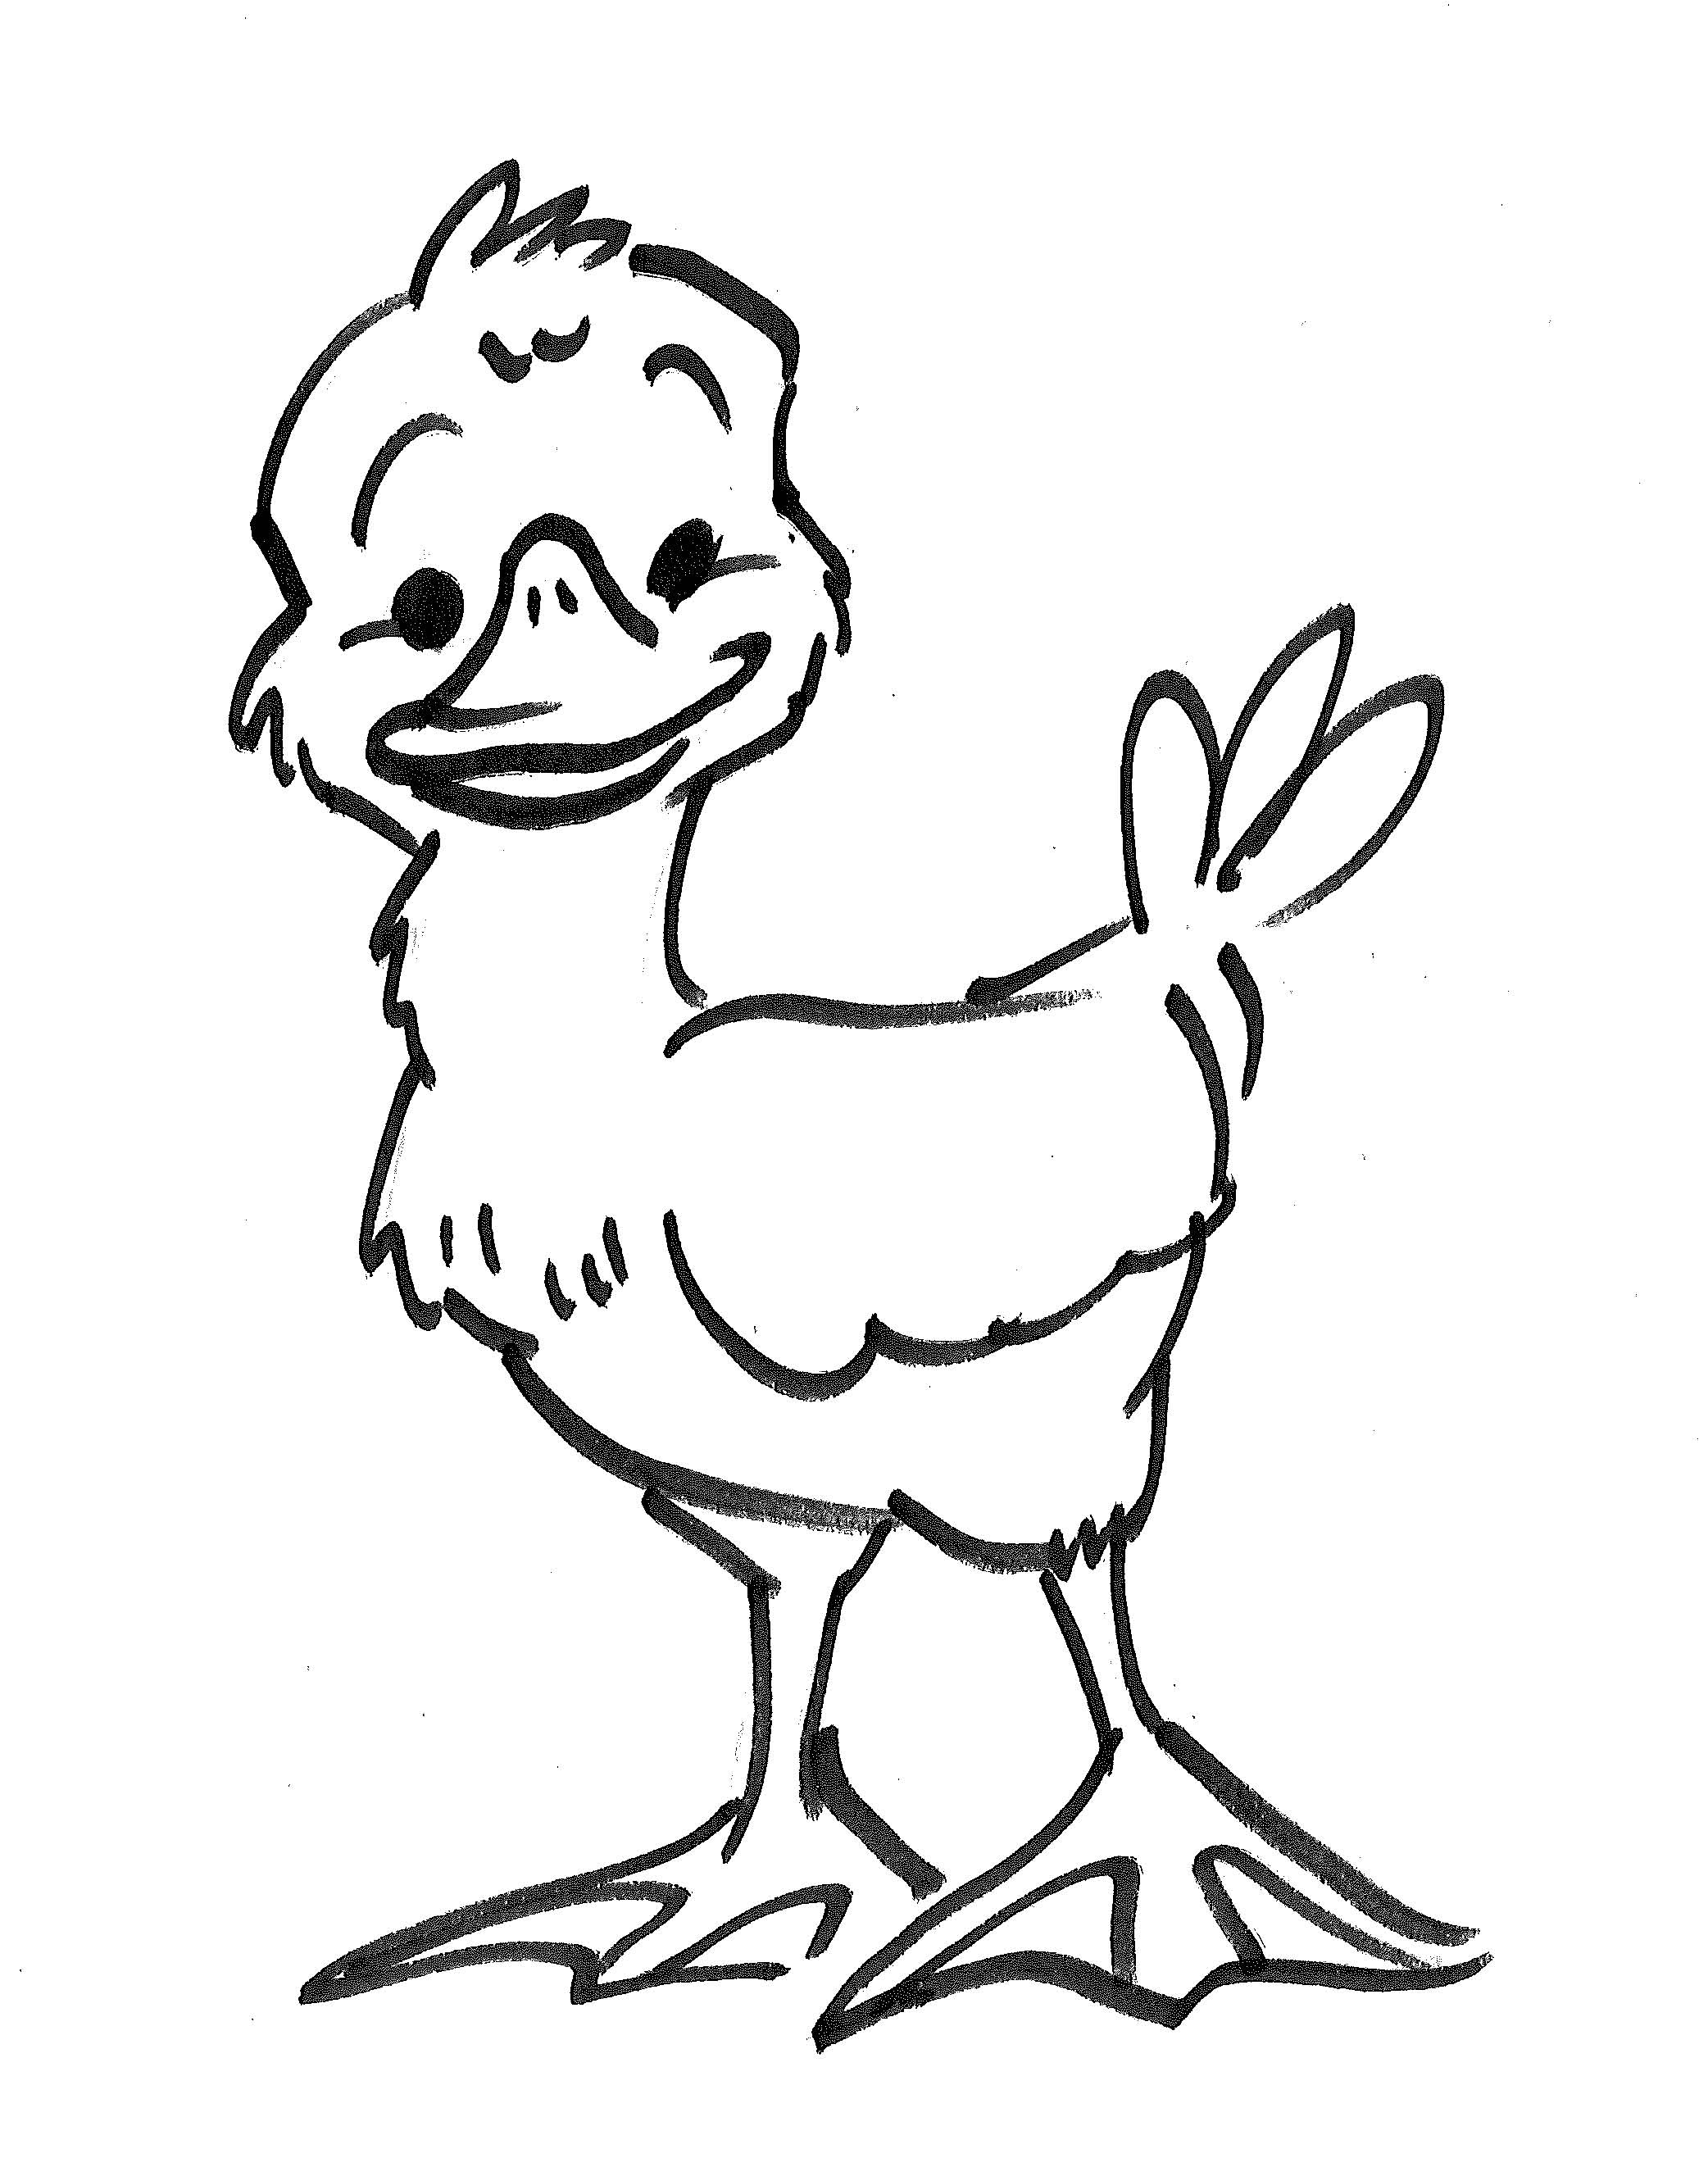 Duck Line Drawing - ClipArt Best